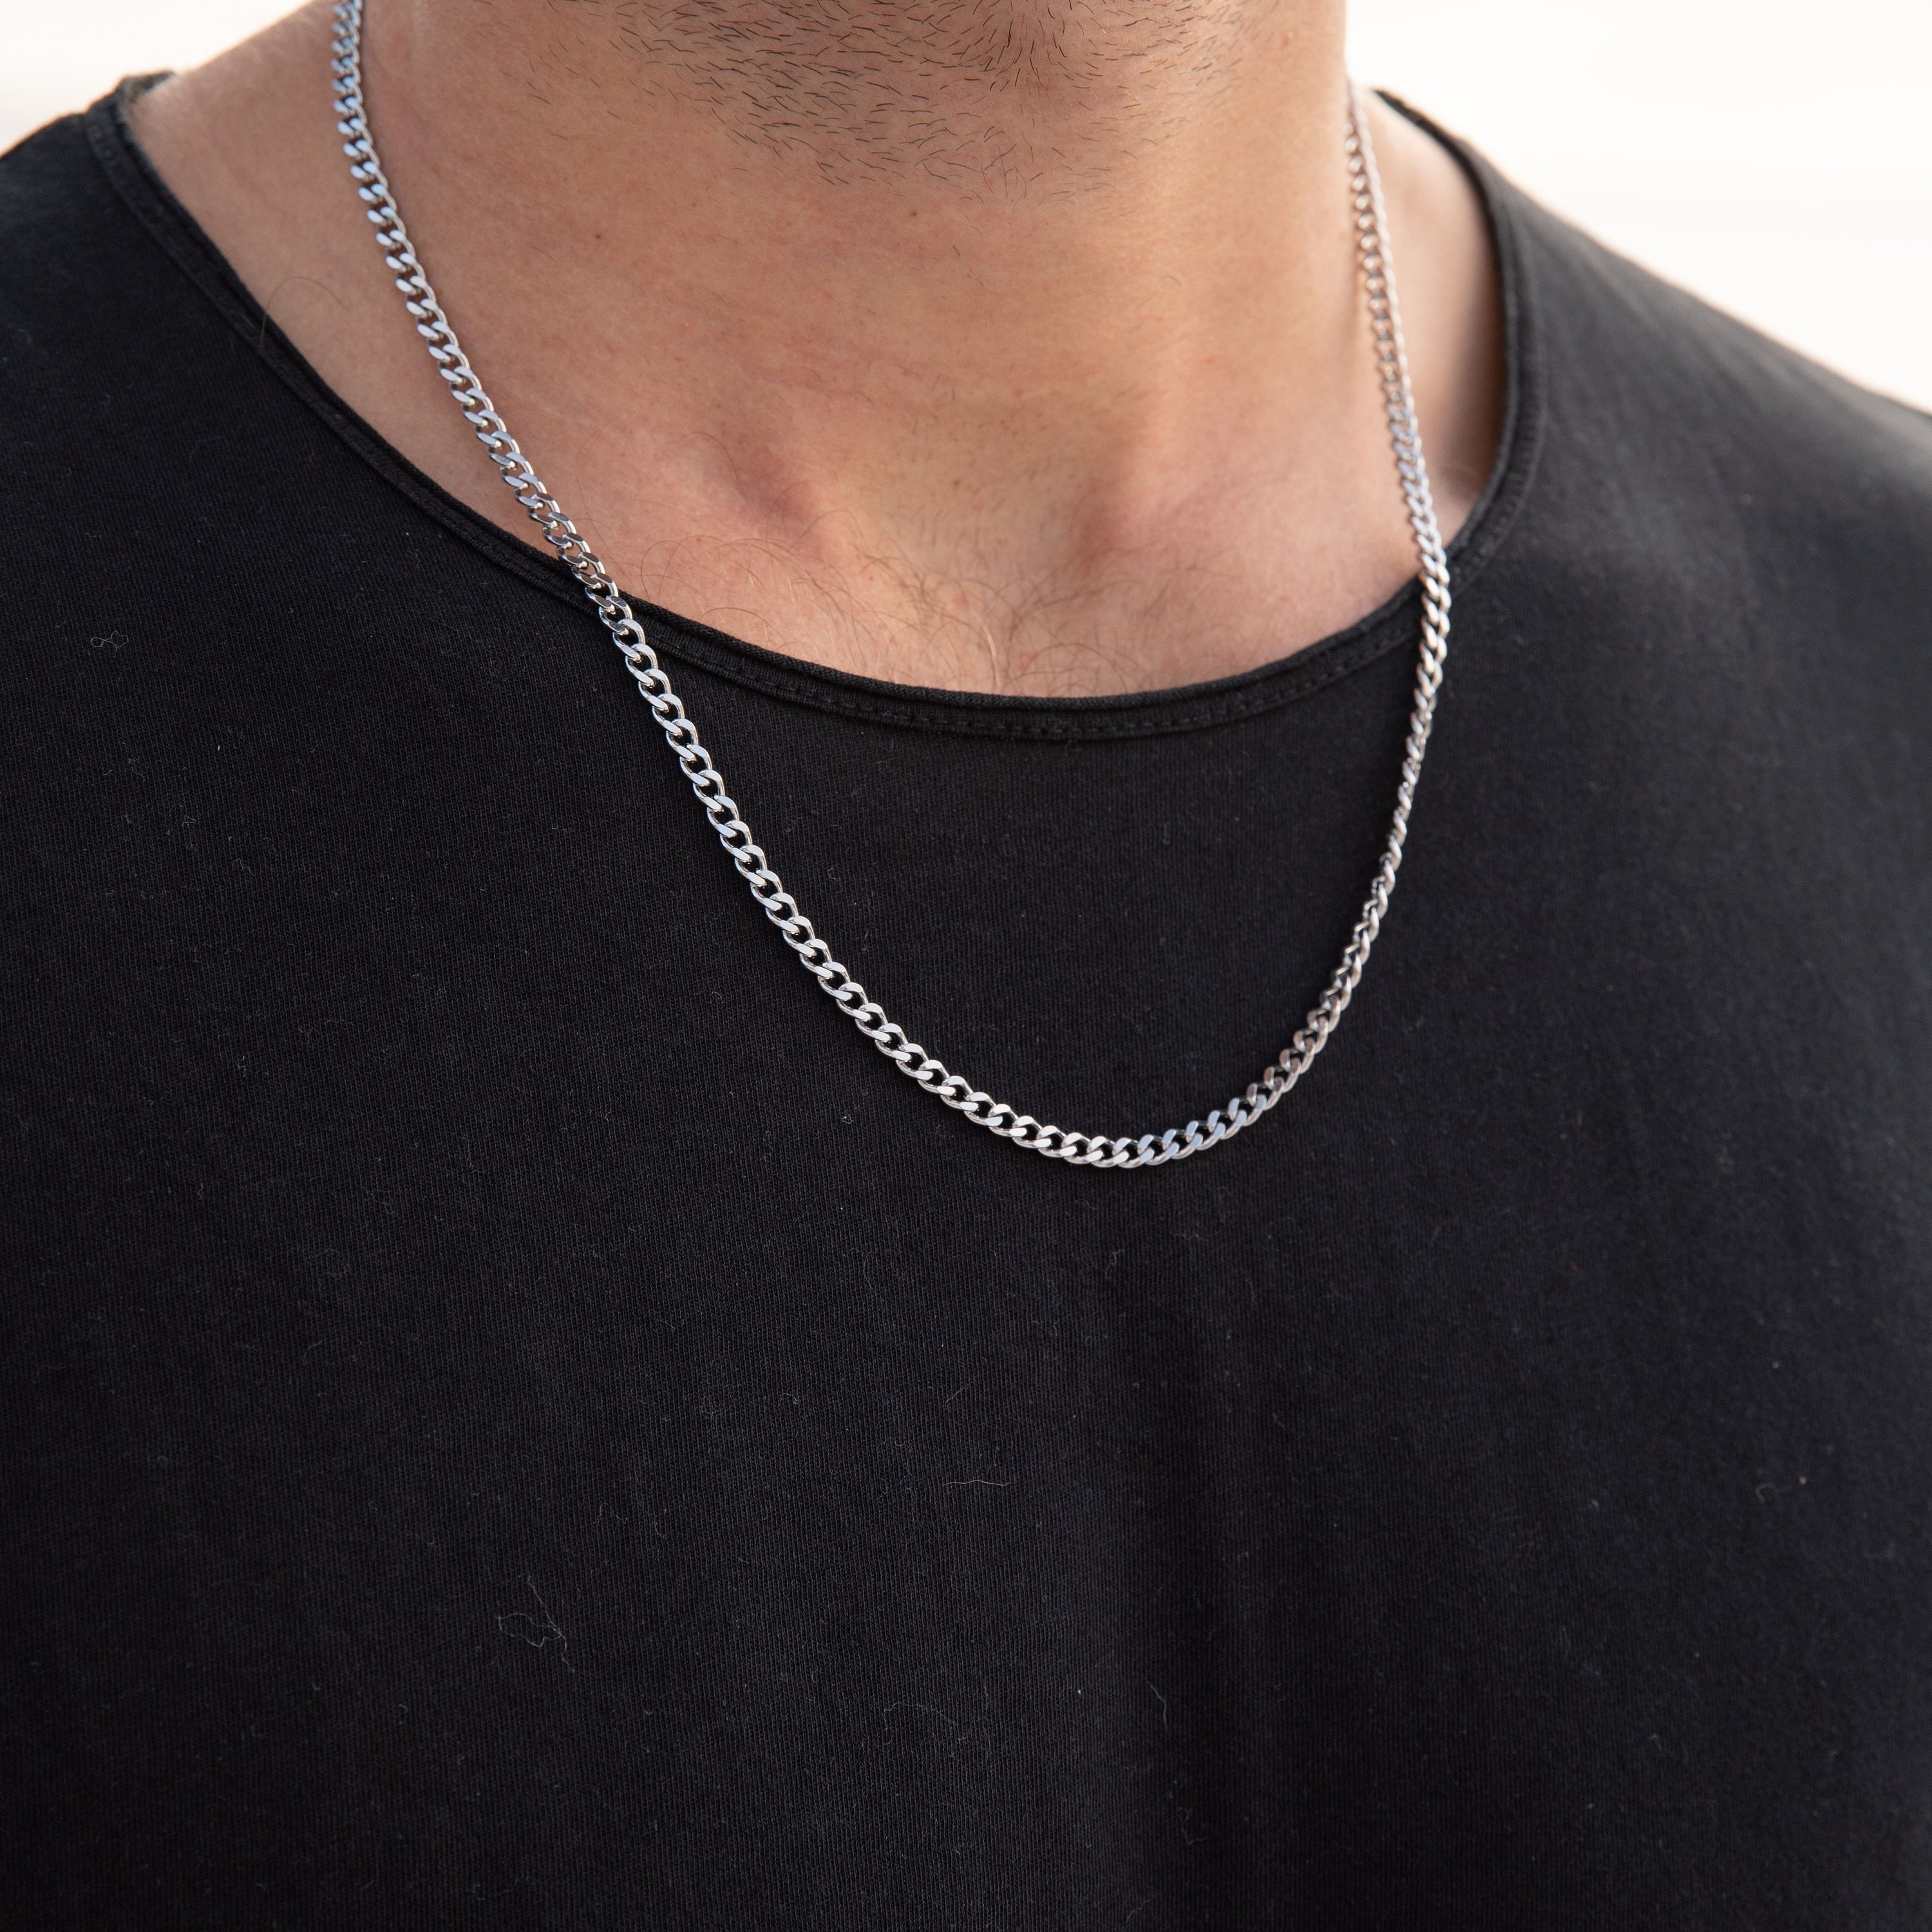 Mens Silver Necklace High Quality Stainless Steel Necklace - Etsy